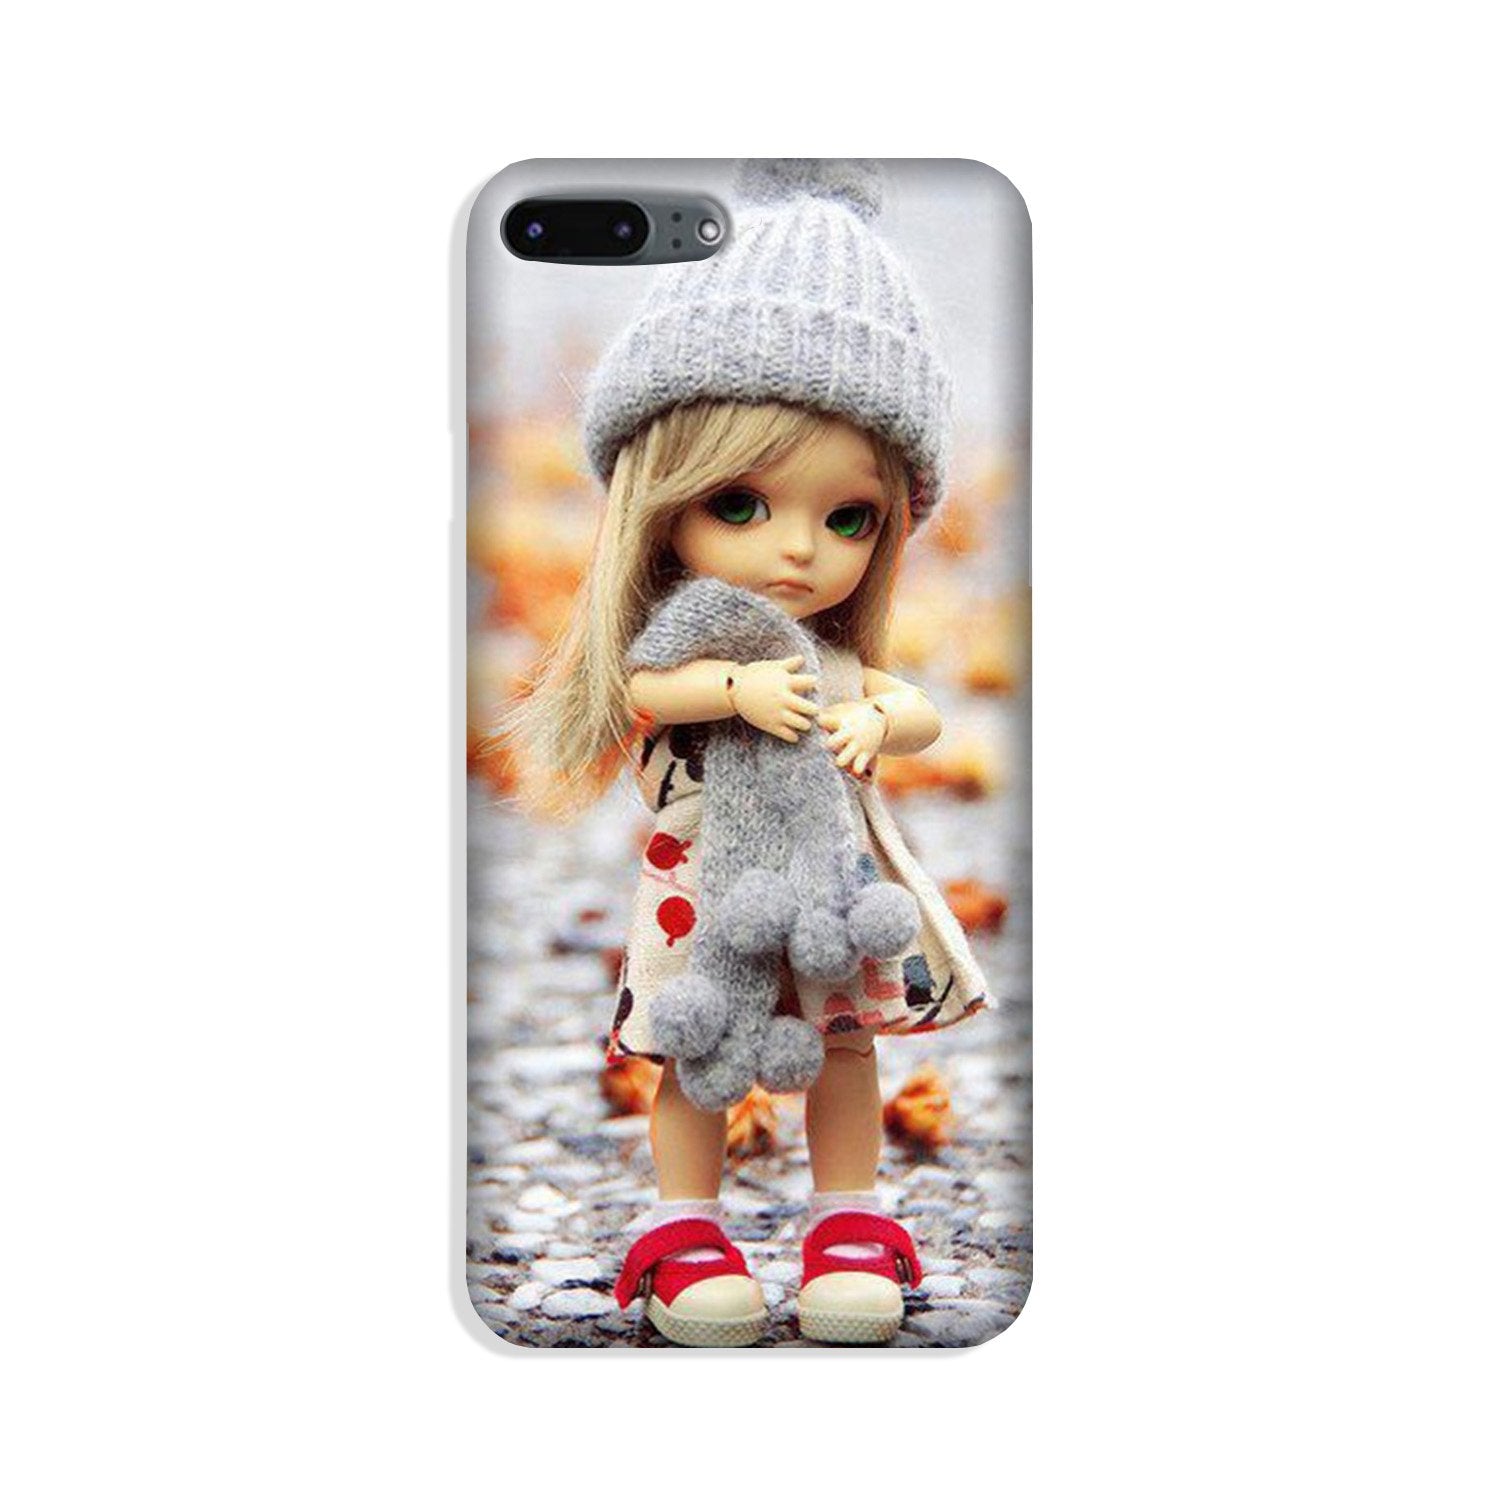 Cute Doll Case for iPhone 8 Plus